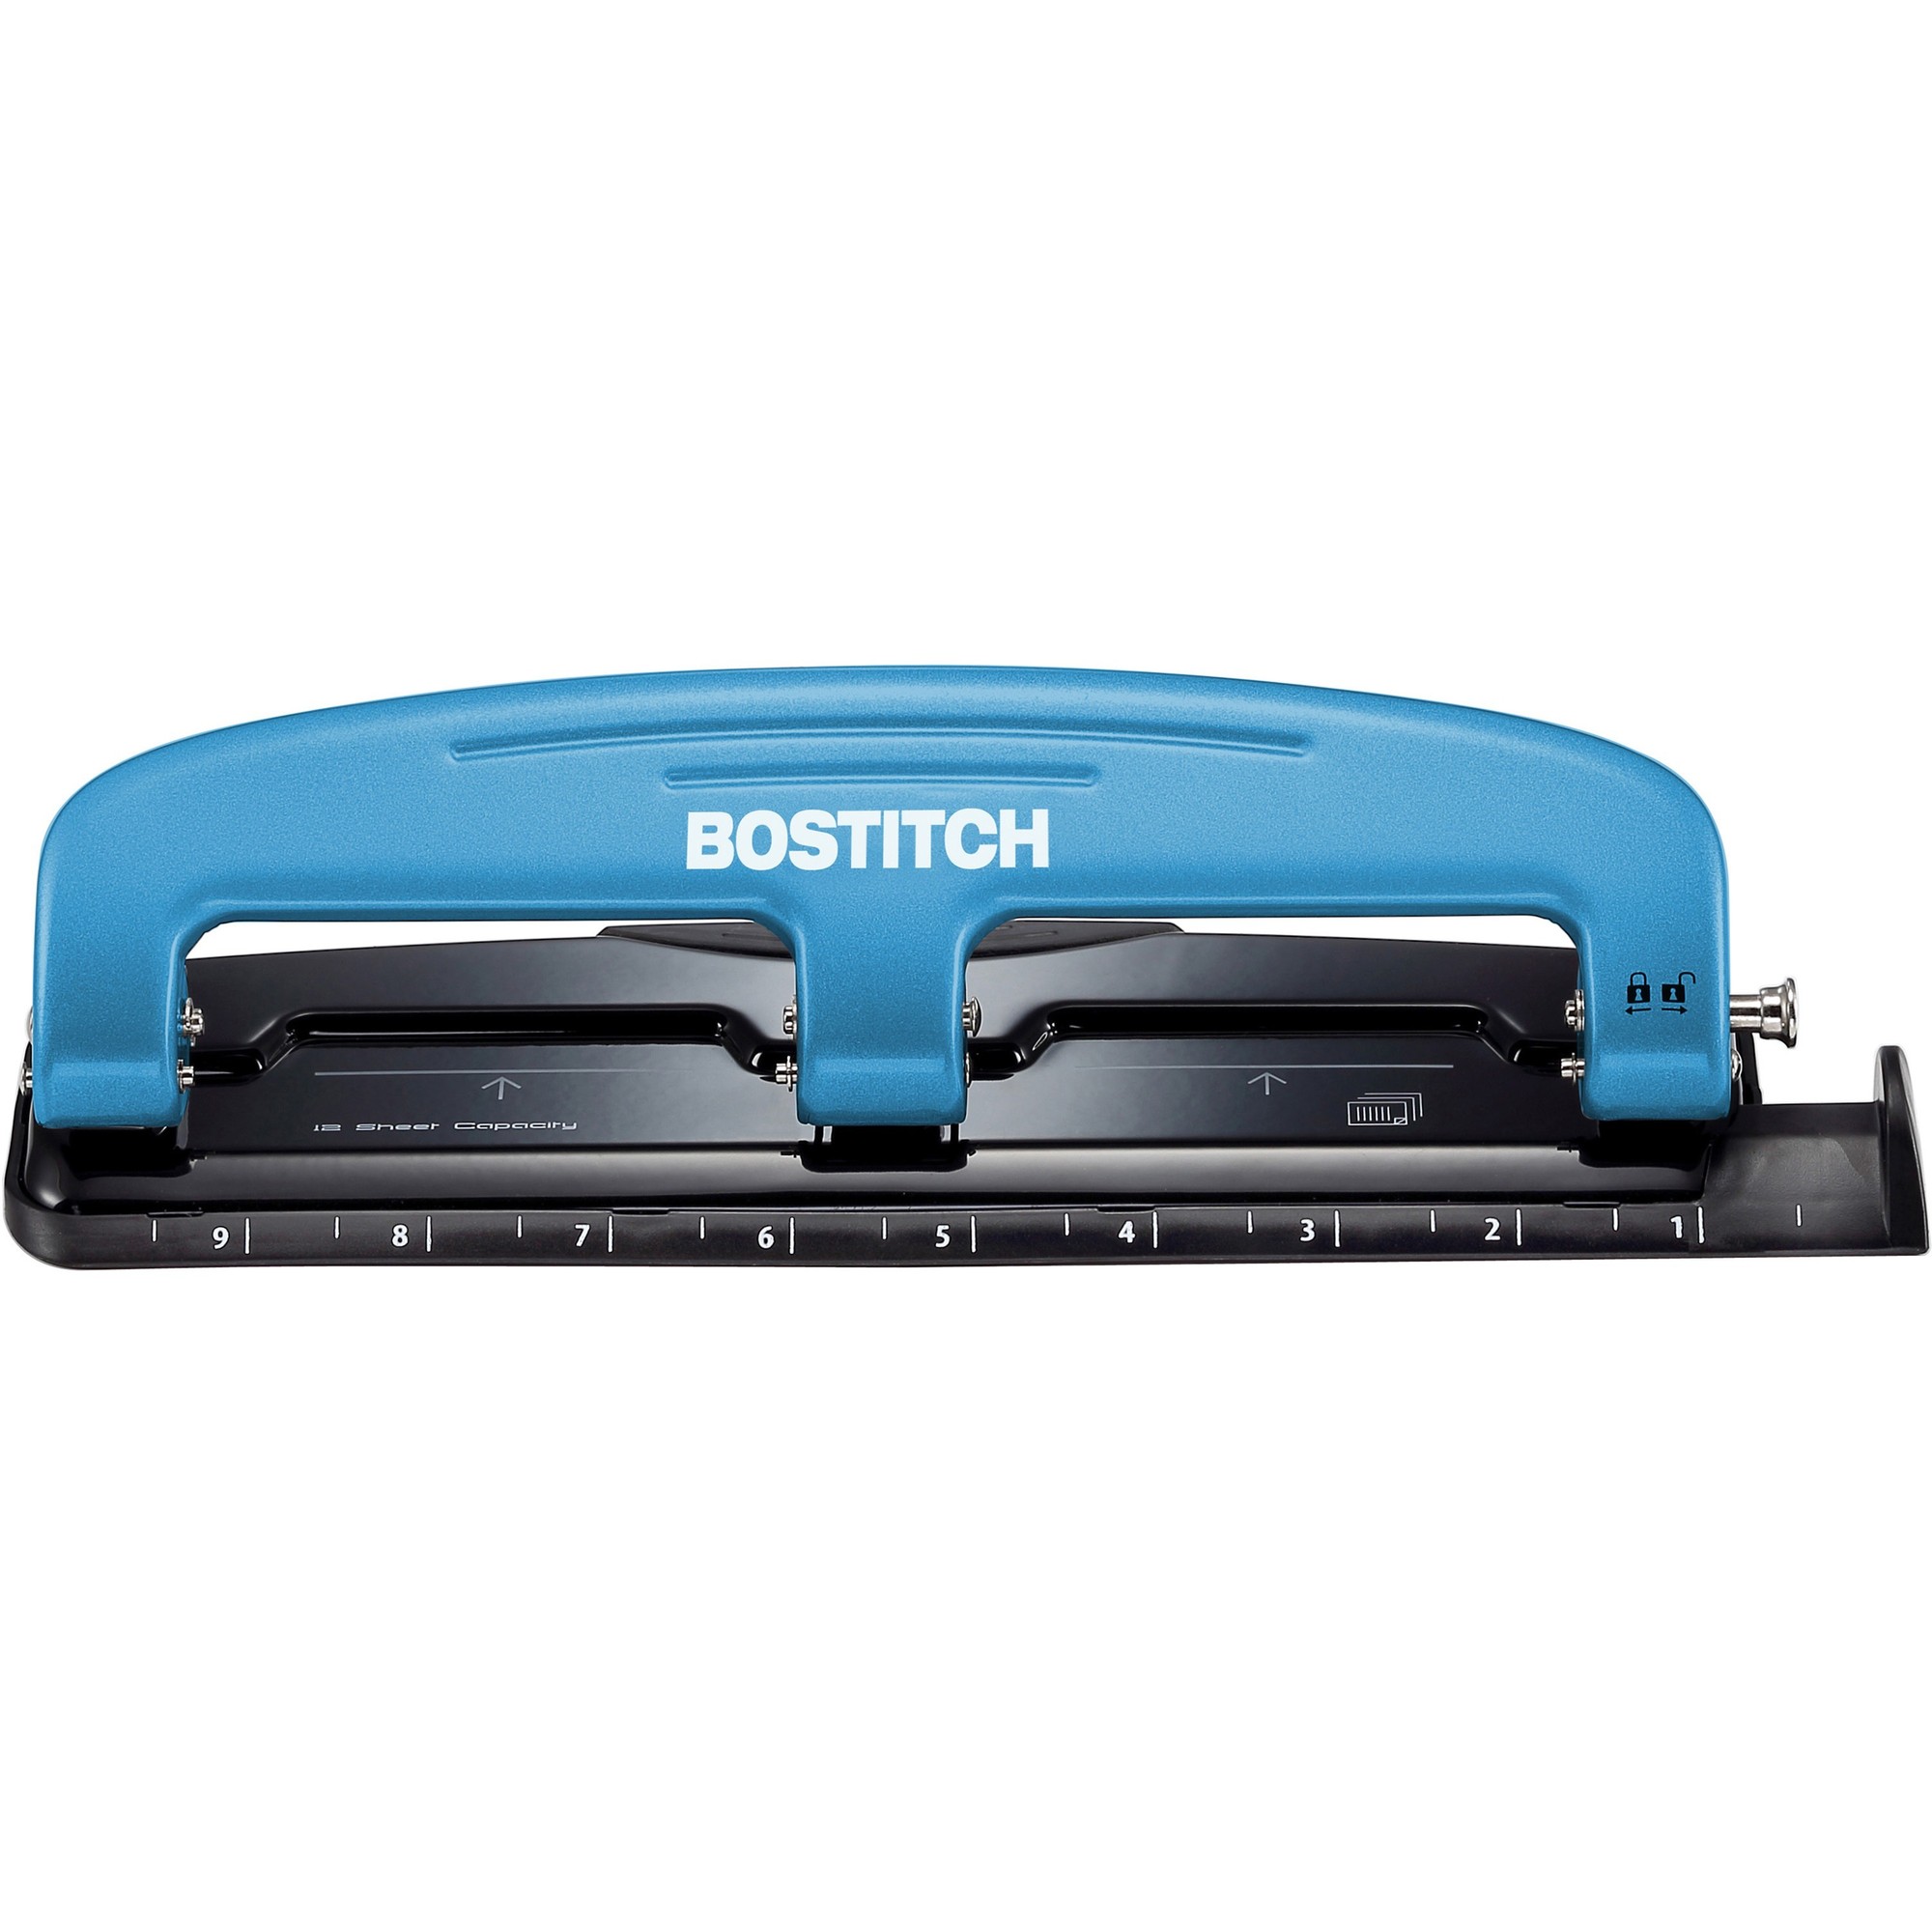 Bostitch EZ Squeeze 12 Three-Hole Punch - 3 Punch Head(s) - 12 Sheet - 9/32" Punch Size - Round Shape - 3" x 1.6" - Blue